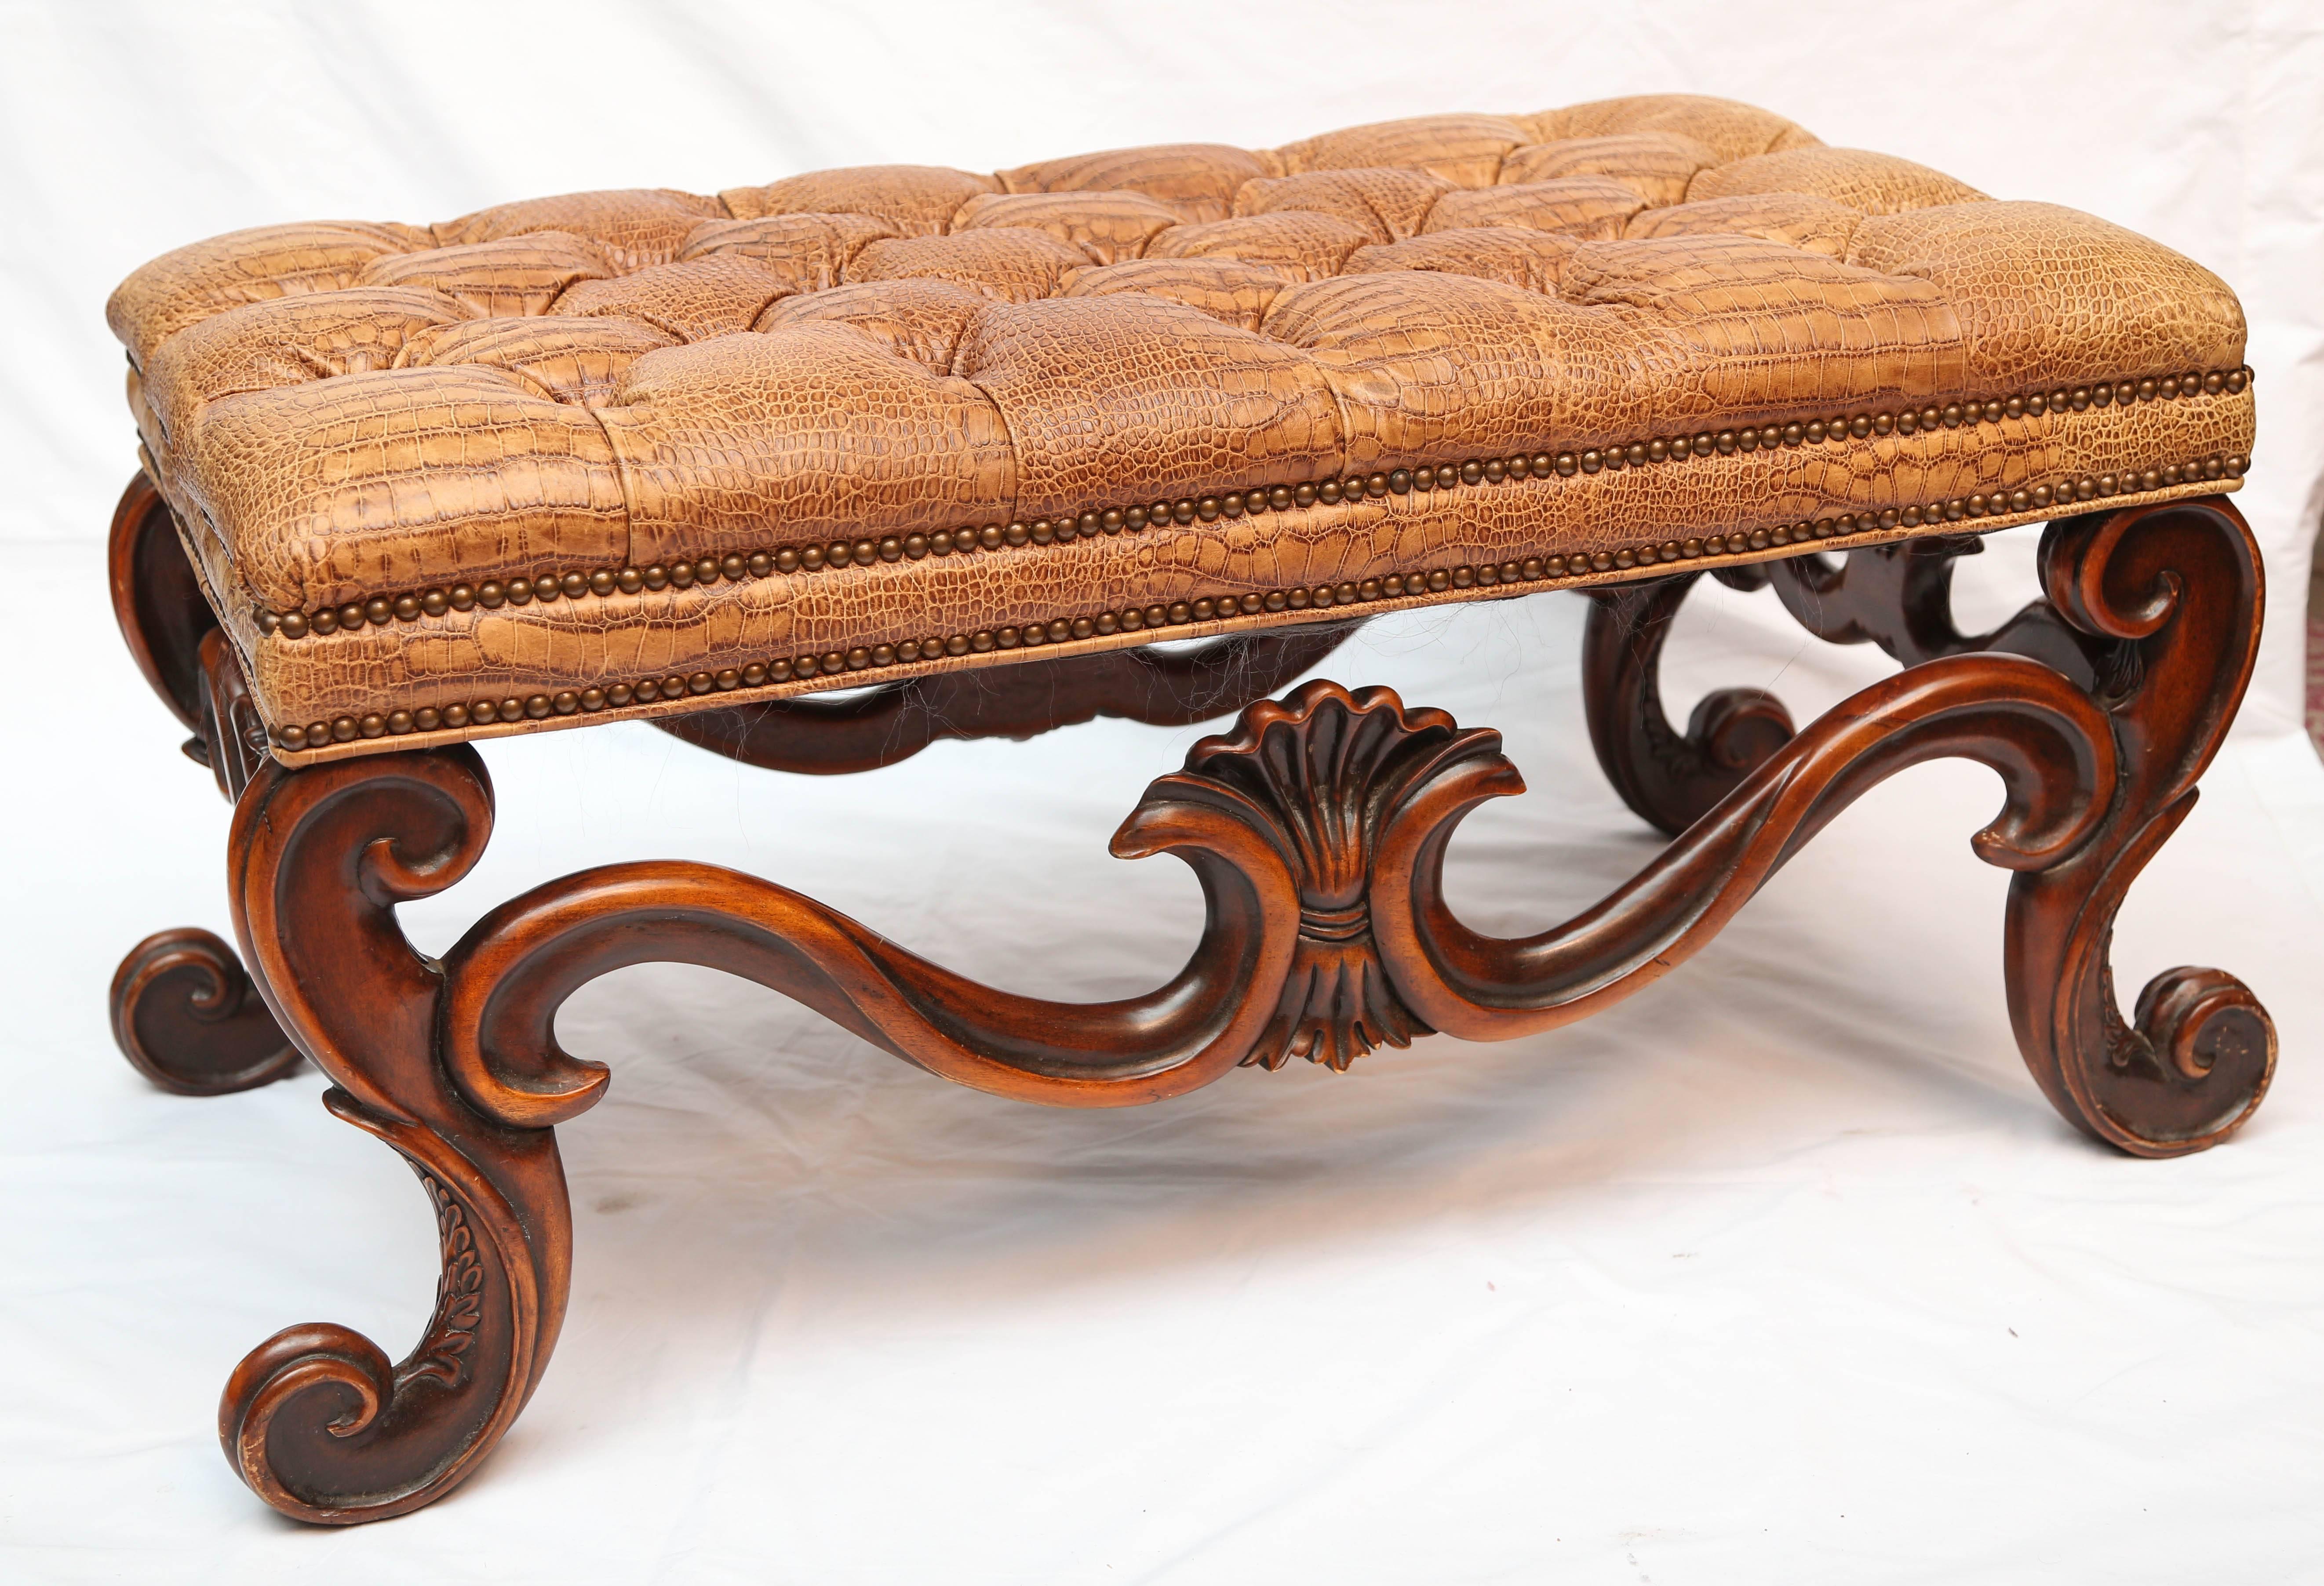 Stunning faux alligator upholstery, mellow patina, beautiful scale and style